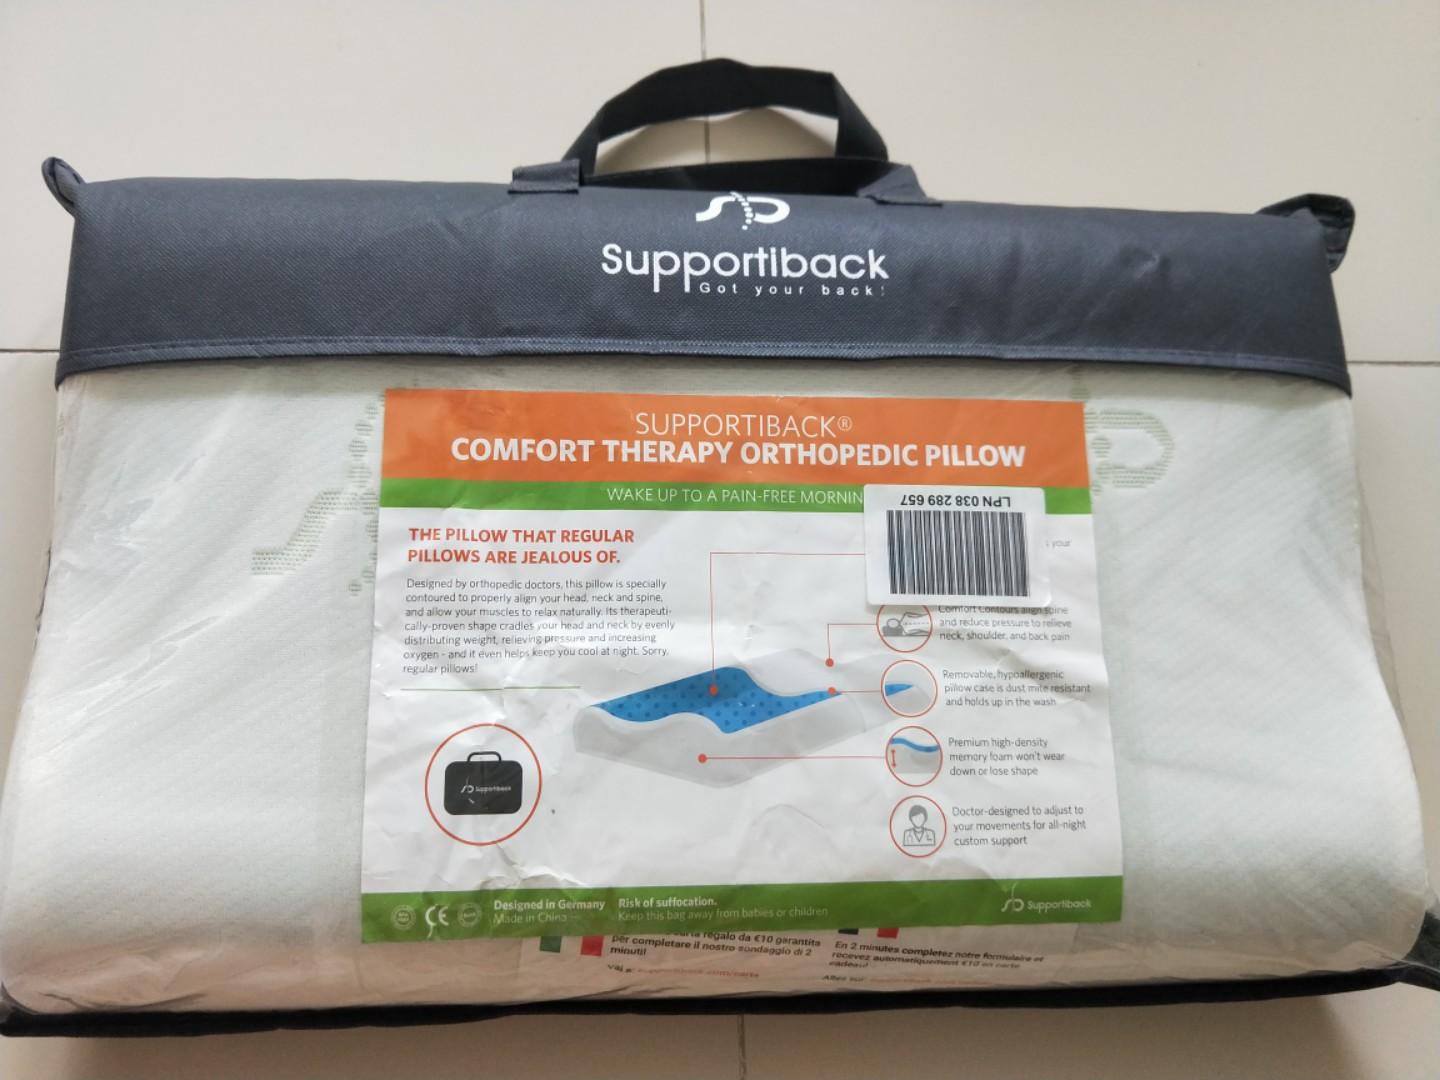 Memory Foam Pillows with and Supportiback Comfort Therapy Orthopedic Pillow 